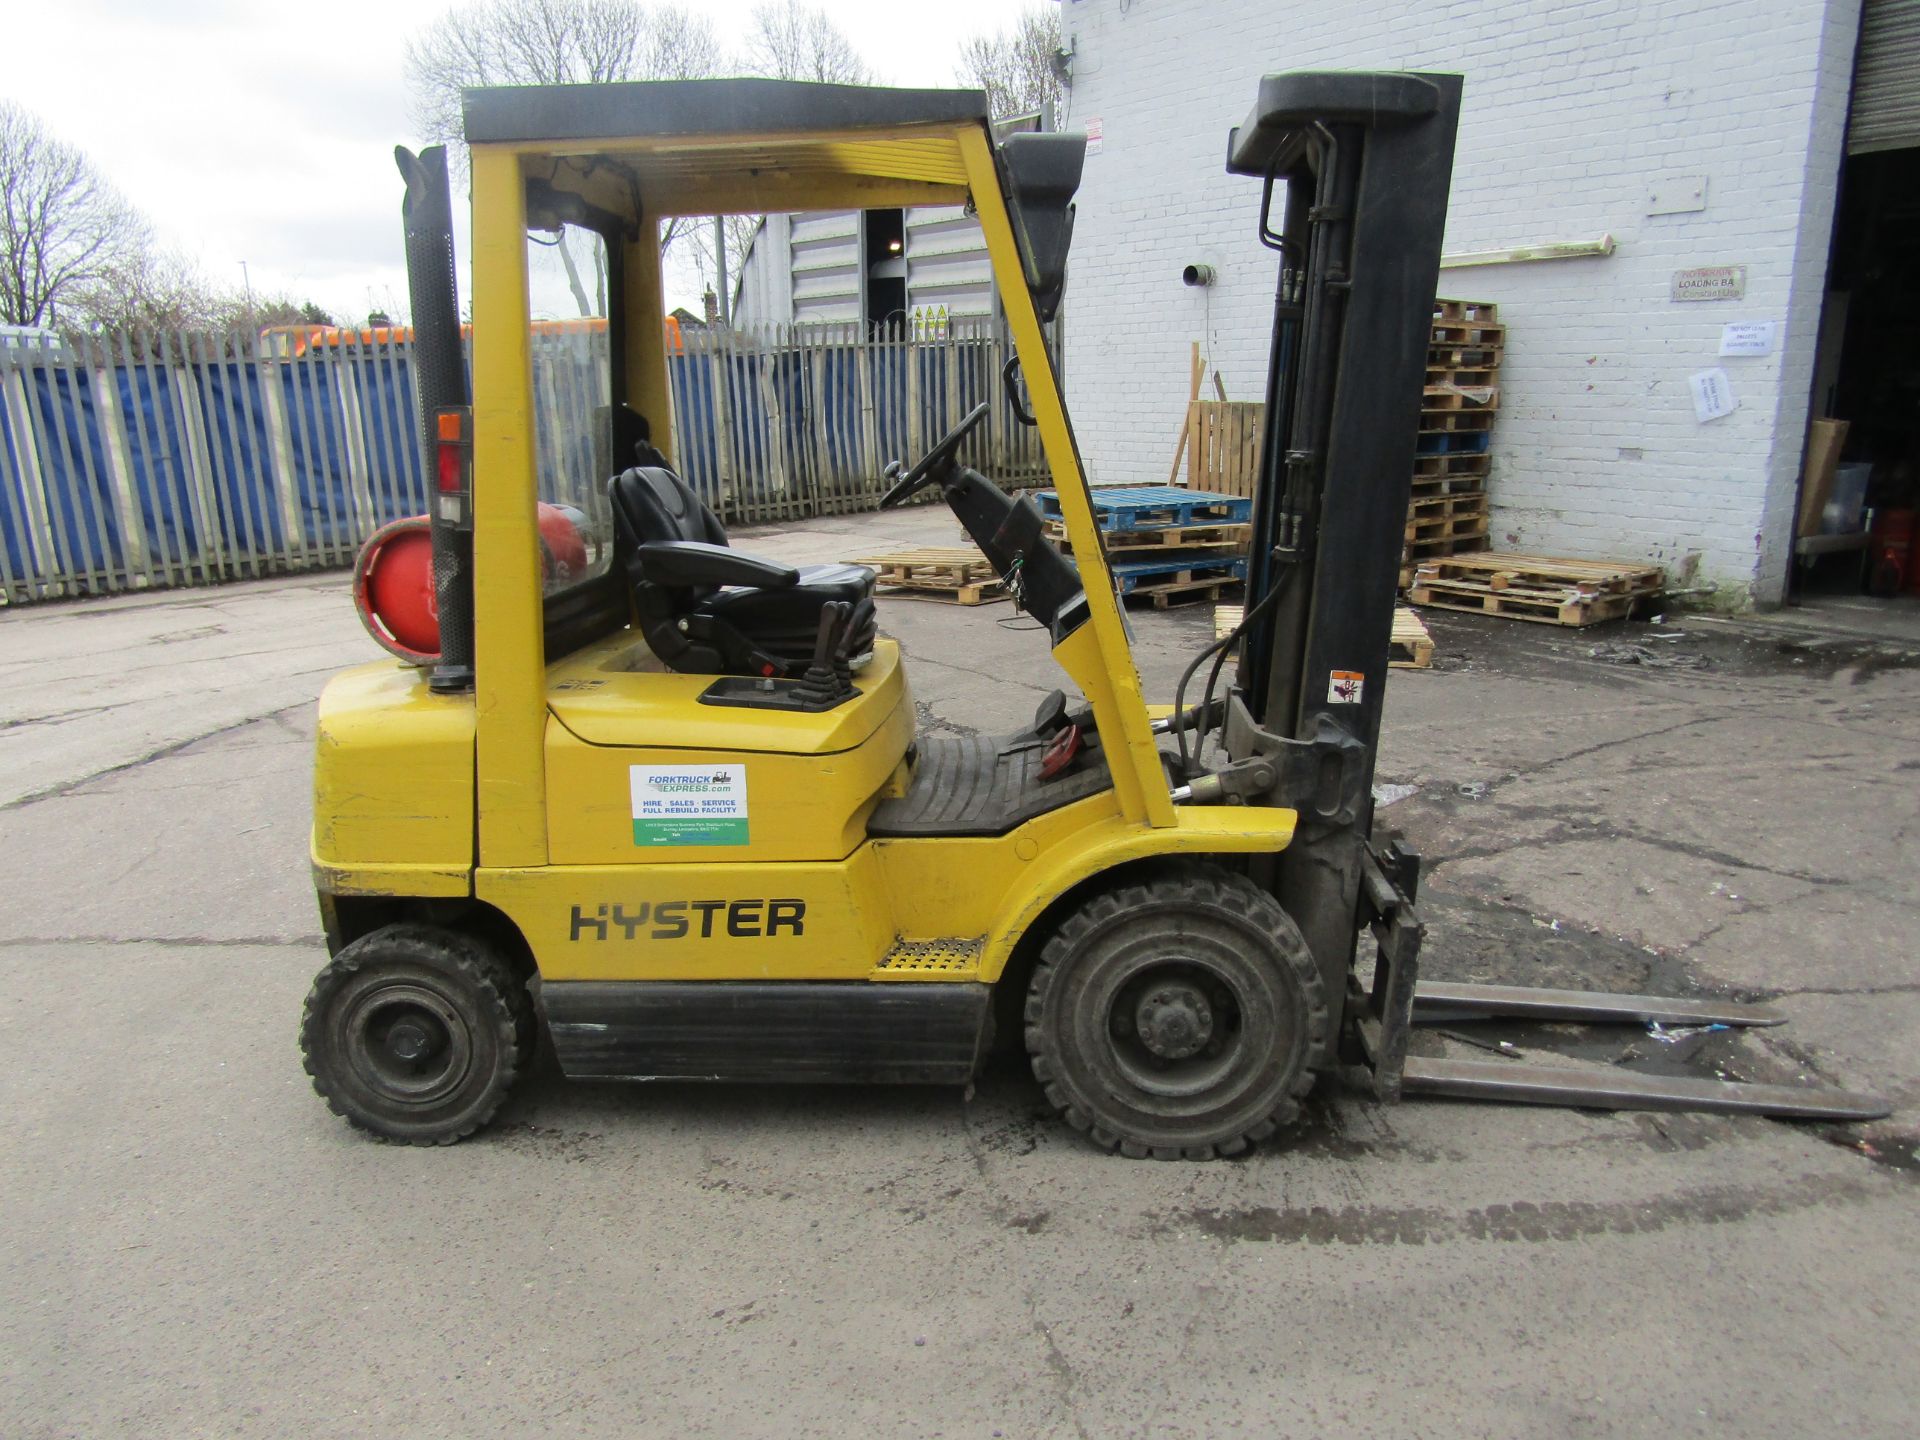 Hyster H2.00Xm Forklift Truck 7235 hours currently manufactured in 2004, has a roof as well as front - Bild 3 aus 9